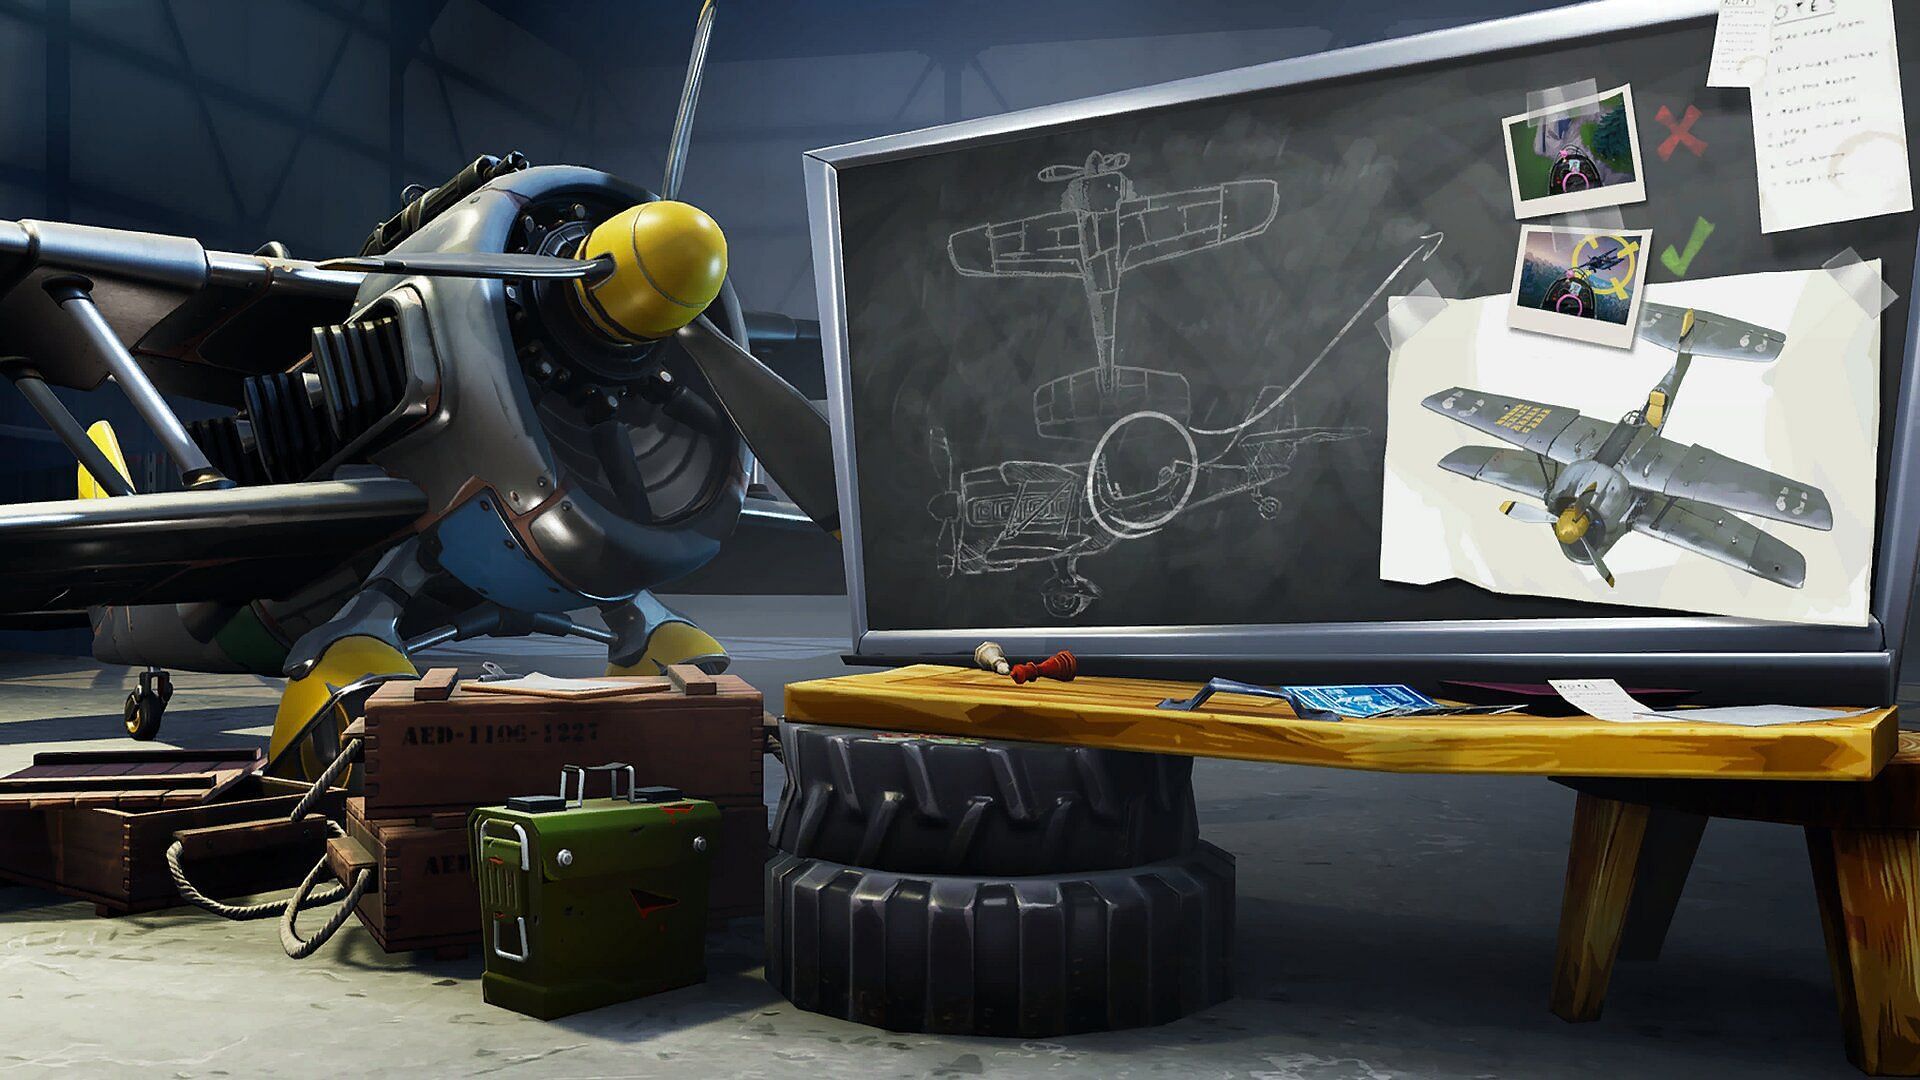 Fortnite update v27.10 early patch notes: X-4 Stormwing, Flint-Knock Pistol, bonus Battle Pass rewards, and more